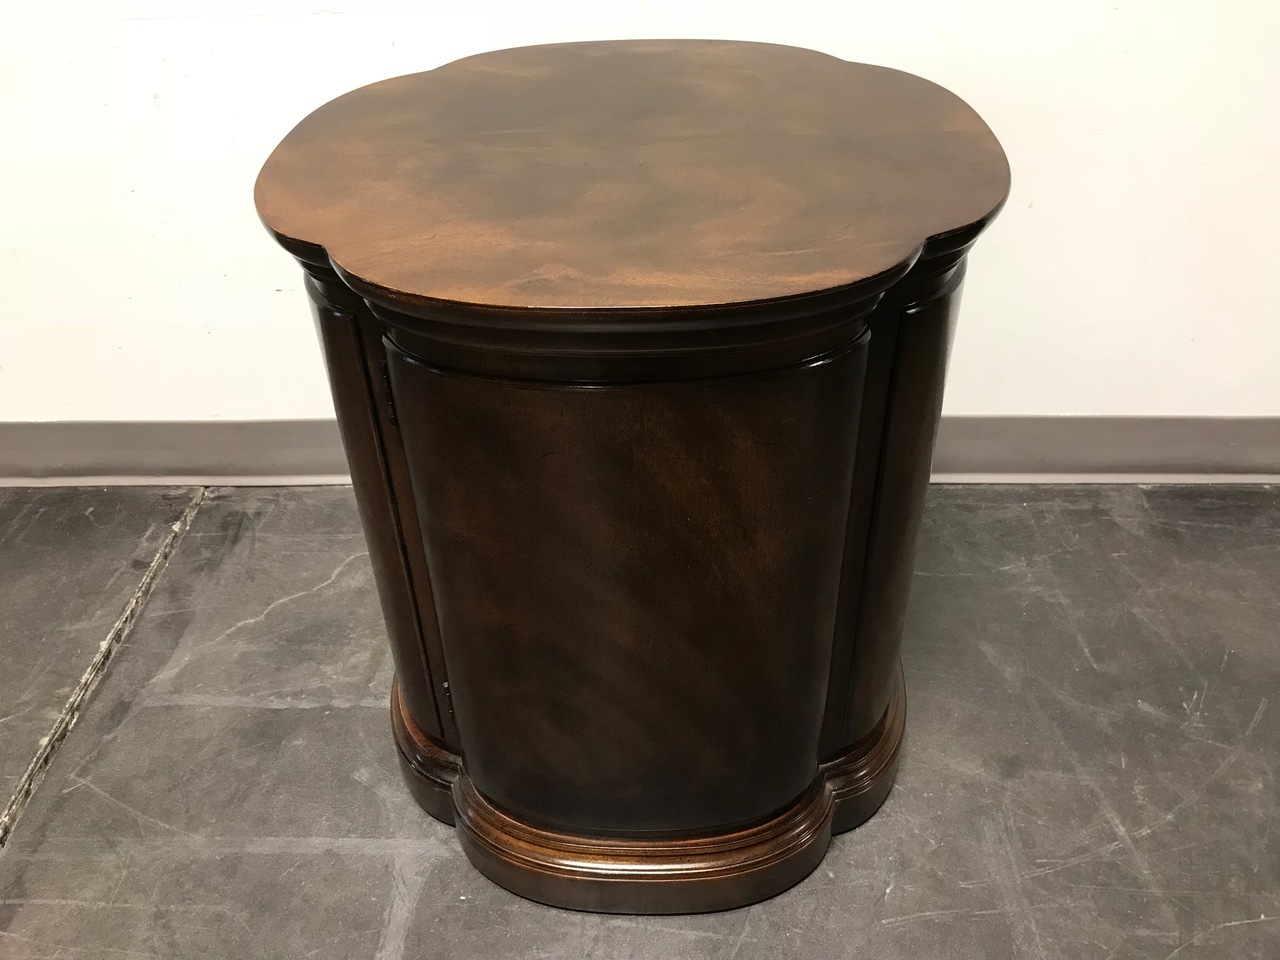 sold out henredon walnut clover shaped end side accent table cabinet boyds fine furnishings west elm industrial storage roland drum throne tables designer legs mid century